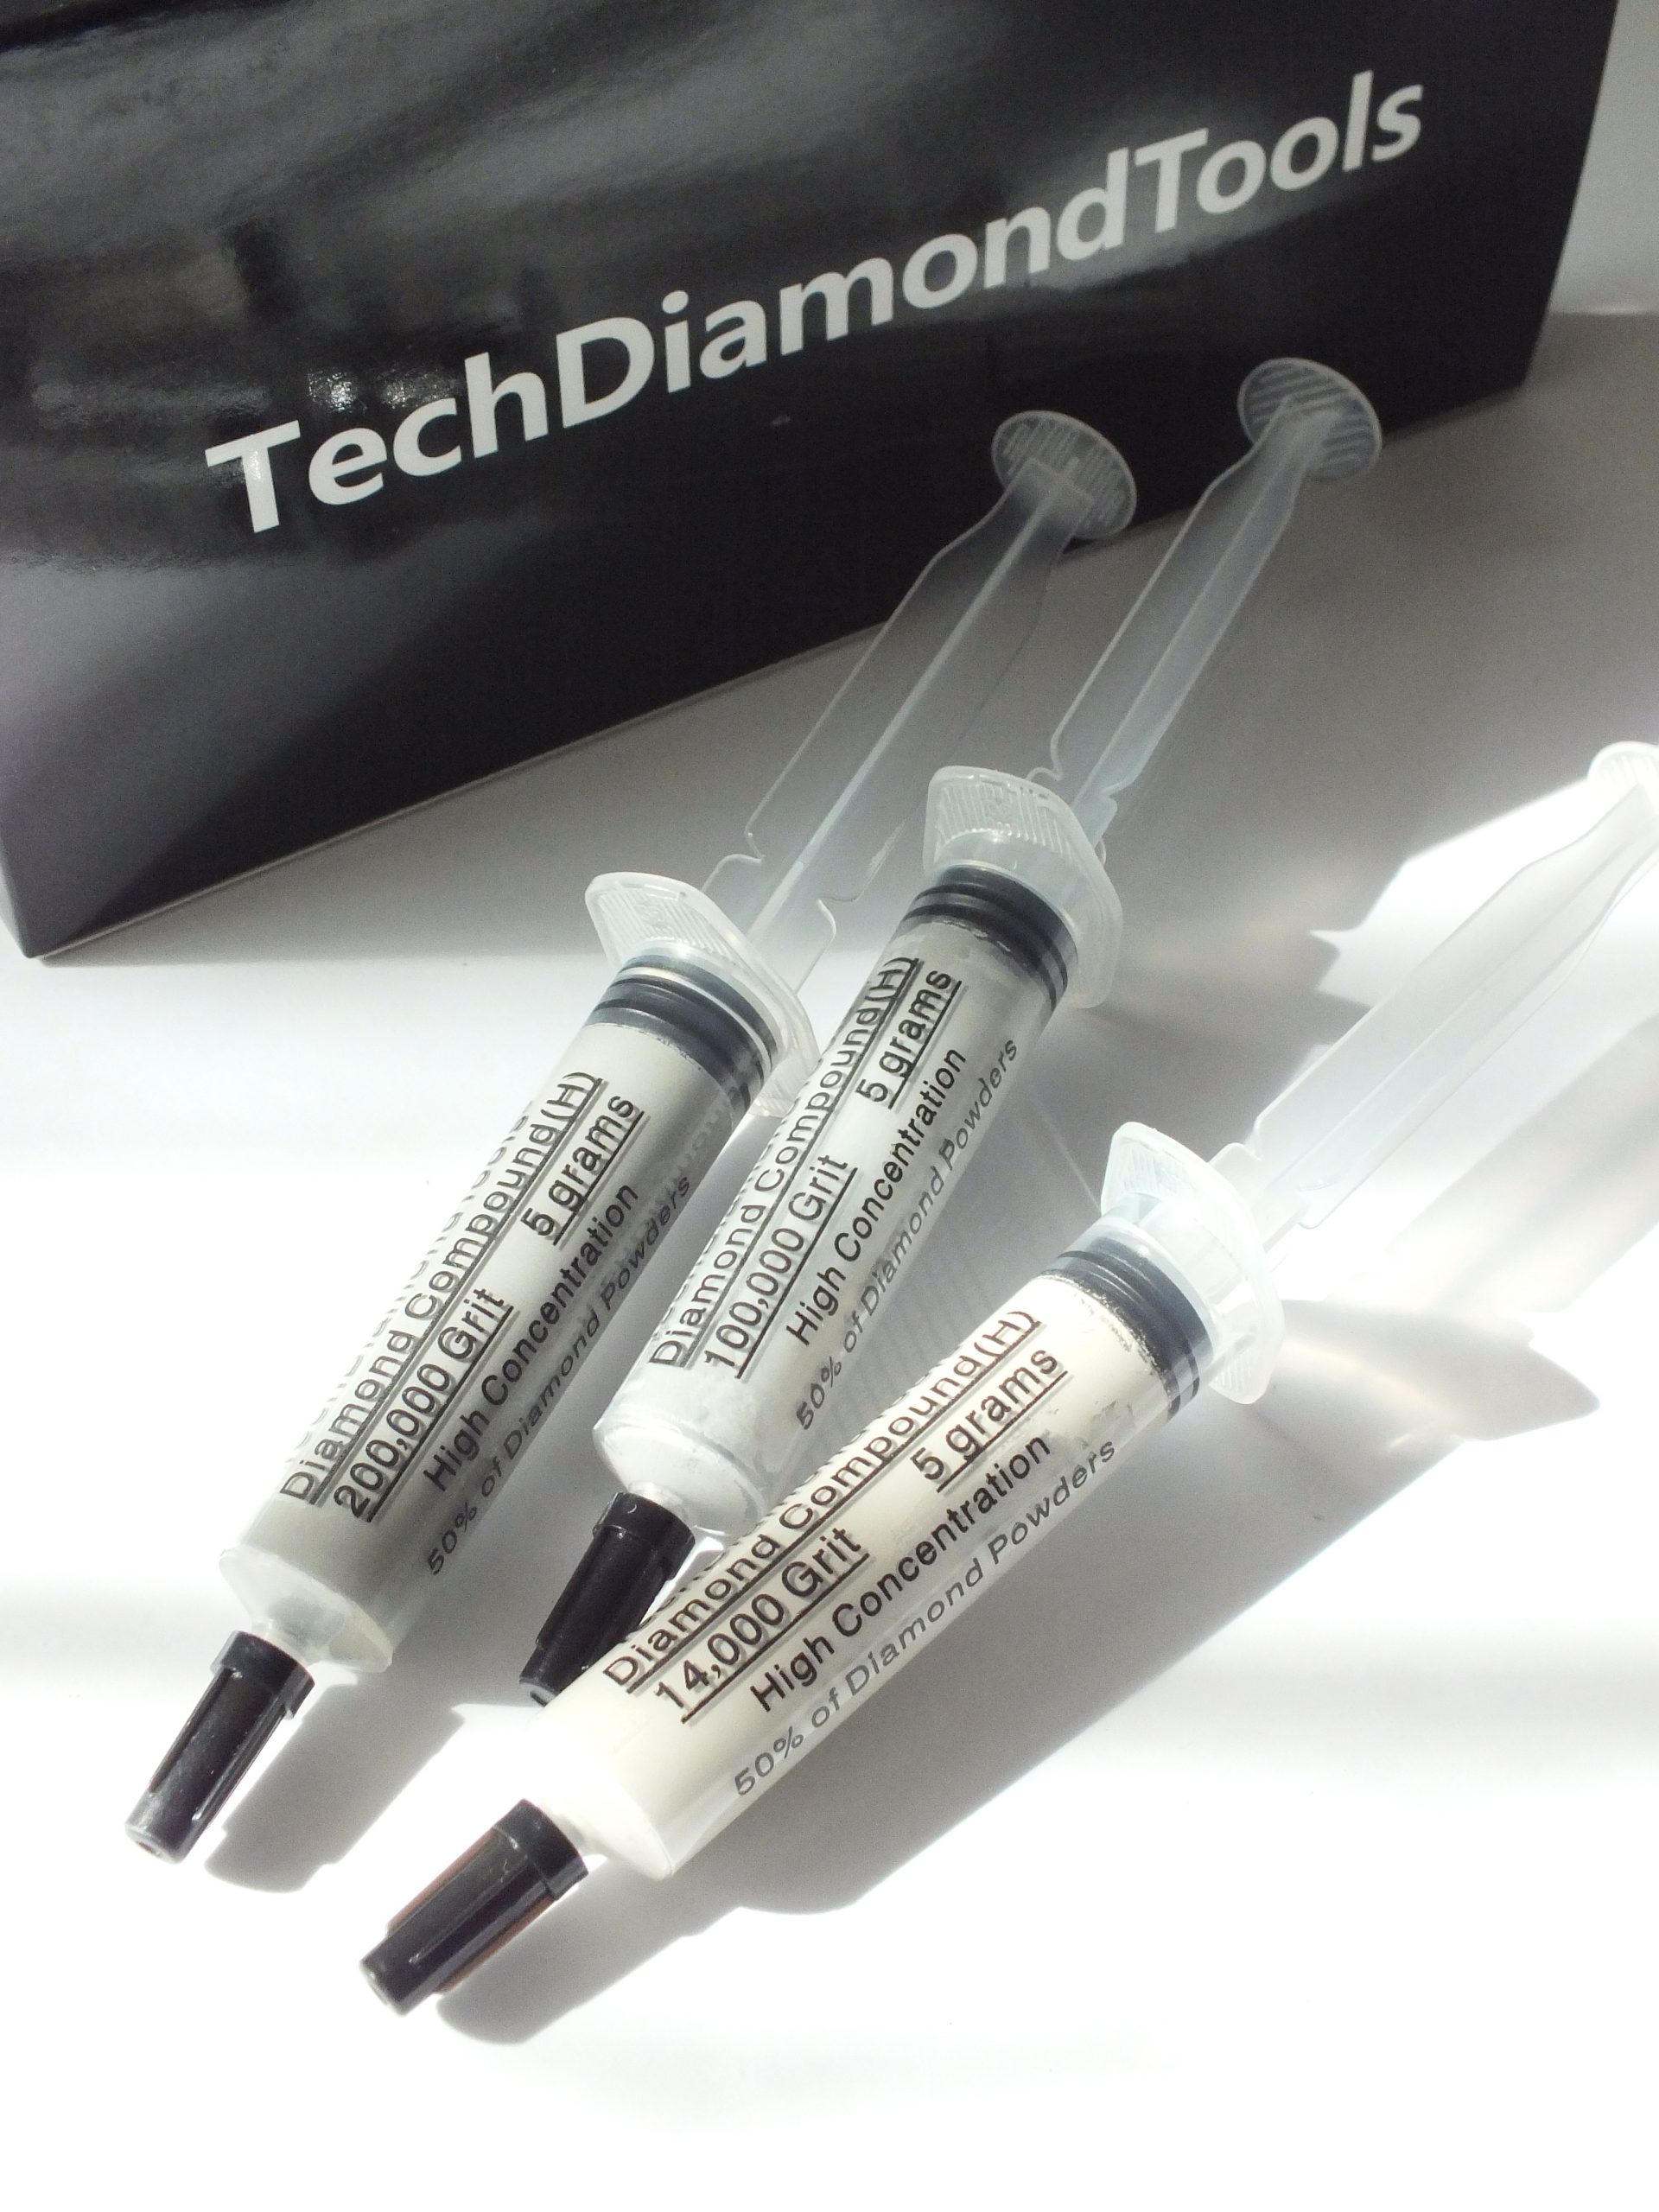 Diamond Polishing Compound What It Is and What It's Used For?